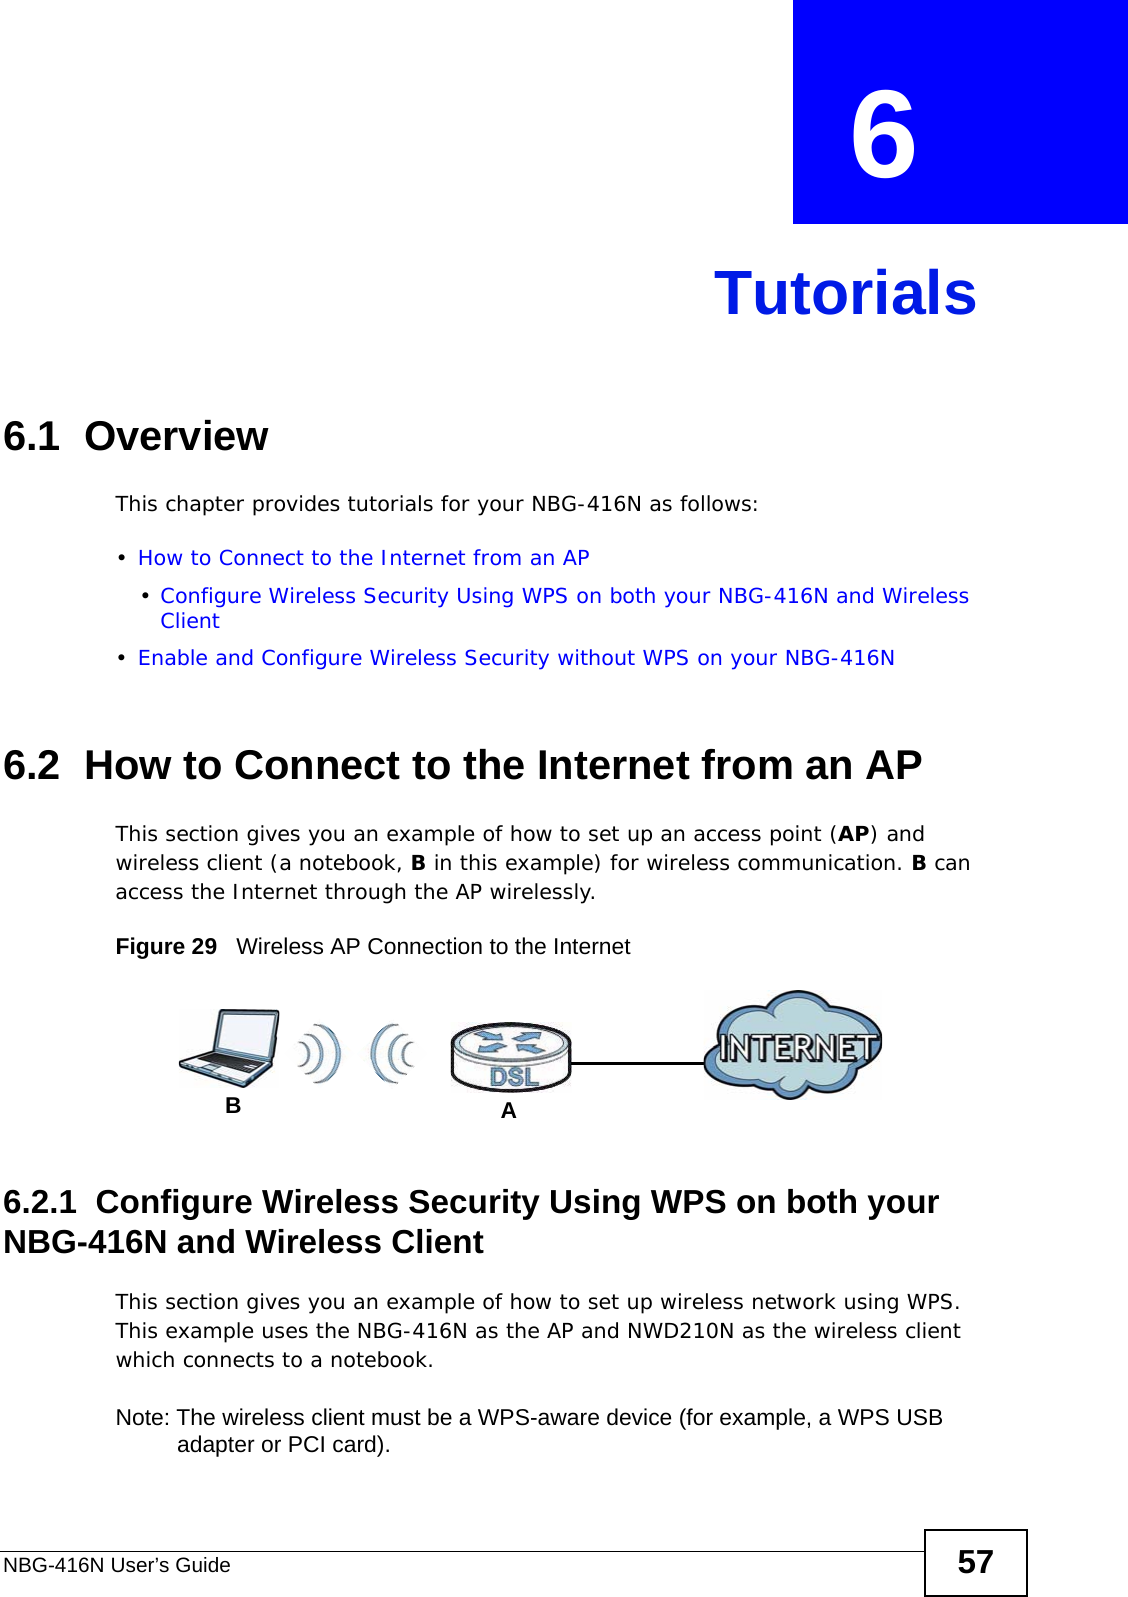 NBG-416N User’s Guide 57CHAPTER  6 Tutorials6.1  OverviewThis chapter provides tutorials for your NBG-416N as follows:•How to Connect to the Internet from an AP•Configure Wireless Security Using WPS on both your NBG-416N and Wireless Client•Enable and Configure Wireless Security without WPS on your NBG-416N6.2  How to Connect to the Internet from an APThis section gives you an example of how to set up an access point (AP) and wireless client (a notebook, B in this example) for wireless communication. B can access the Internet through the AP wirelessly.Figure 29   Wireless AP Connection to the Internet6.2.1  Configure Wireless Security Using WPS on both your NBG-416N and Wireless ClientThis section gives you an example of how to set up wireless network using WPS. This example uses the NBG-416N as the AP and NWD210N as the wireless client which connects to a notebook. Note: The wireless client must be a WPS-aware device (for example, a WPS USB adapter or PCI card).AB